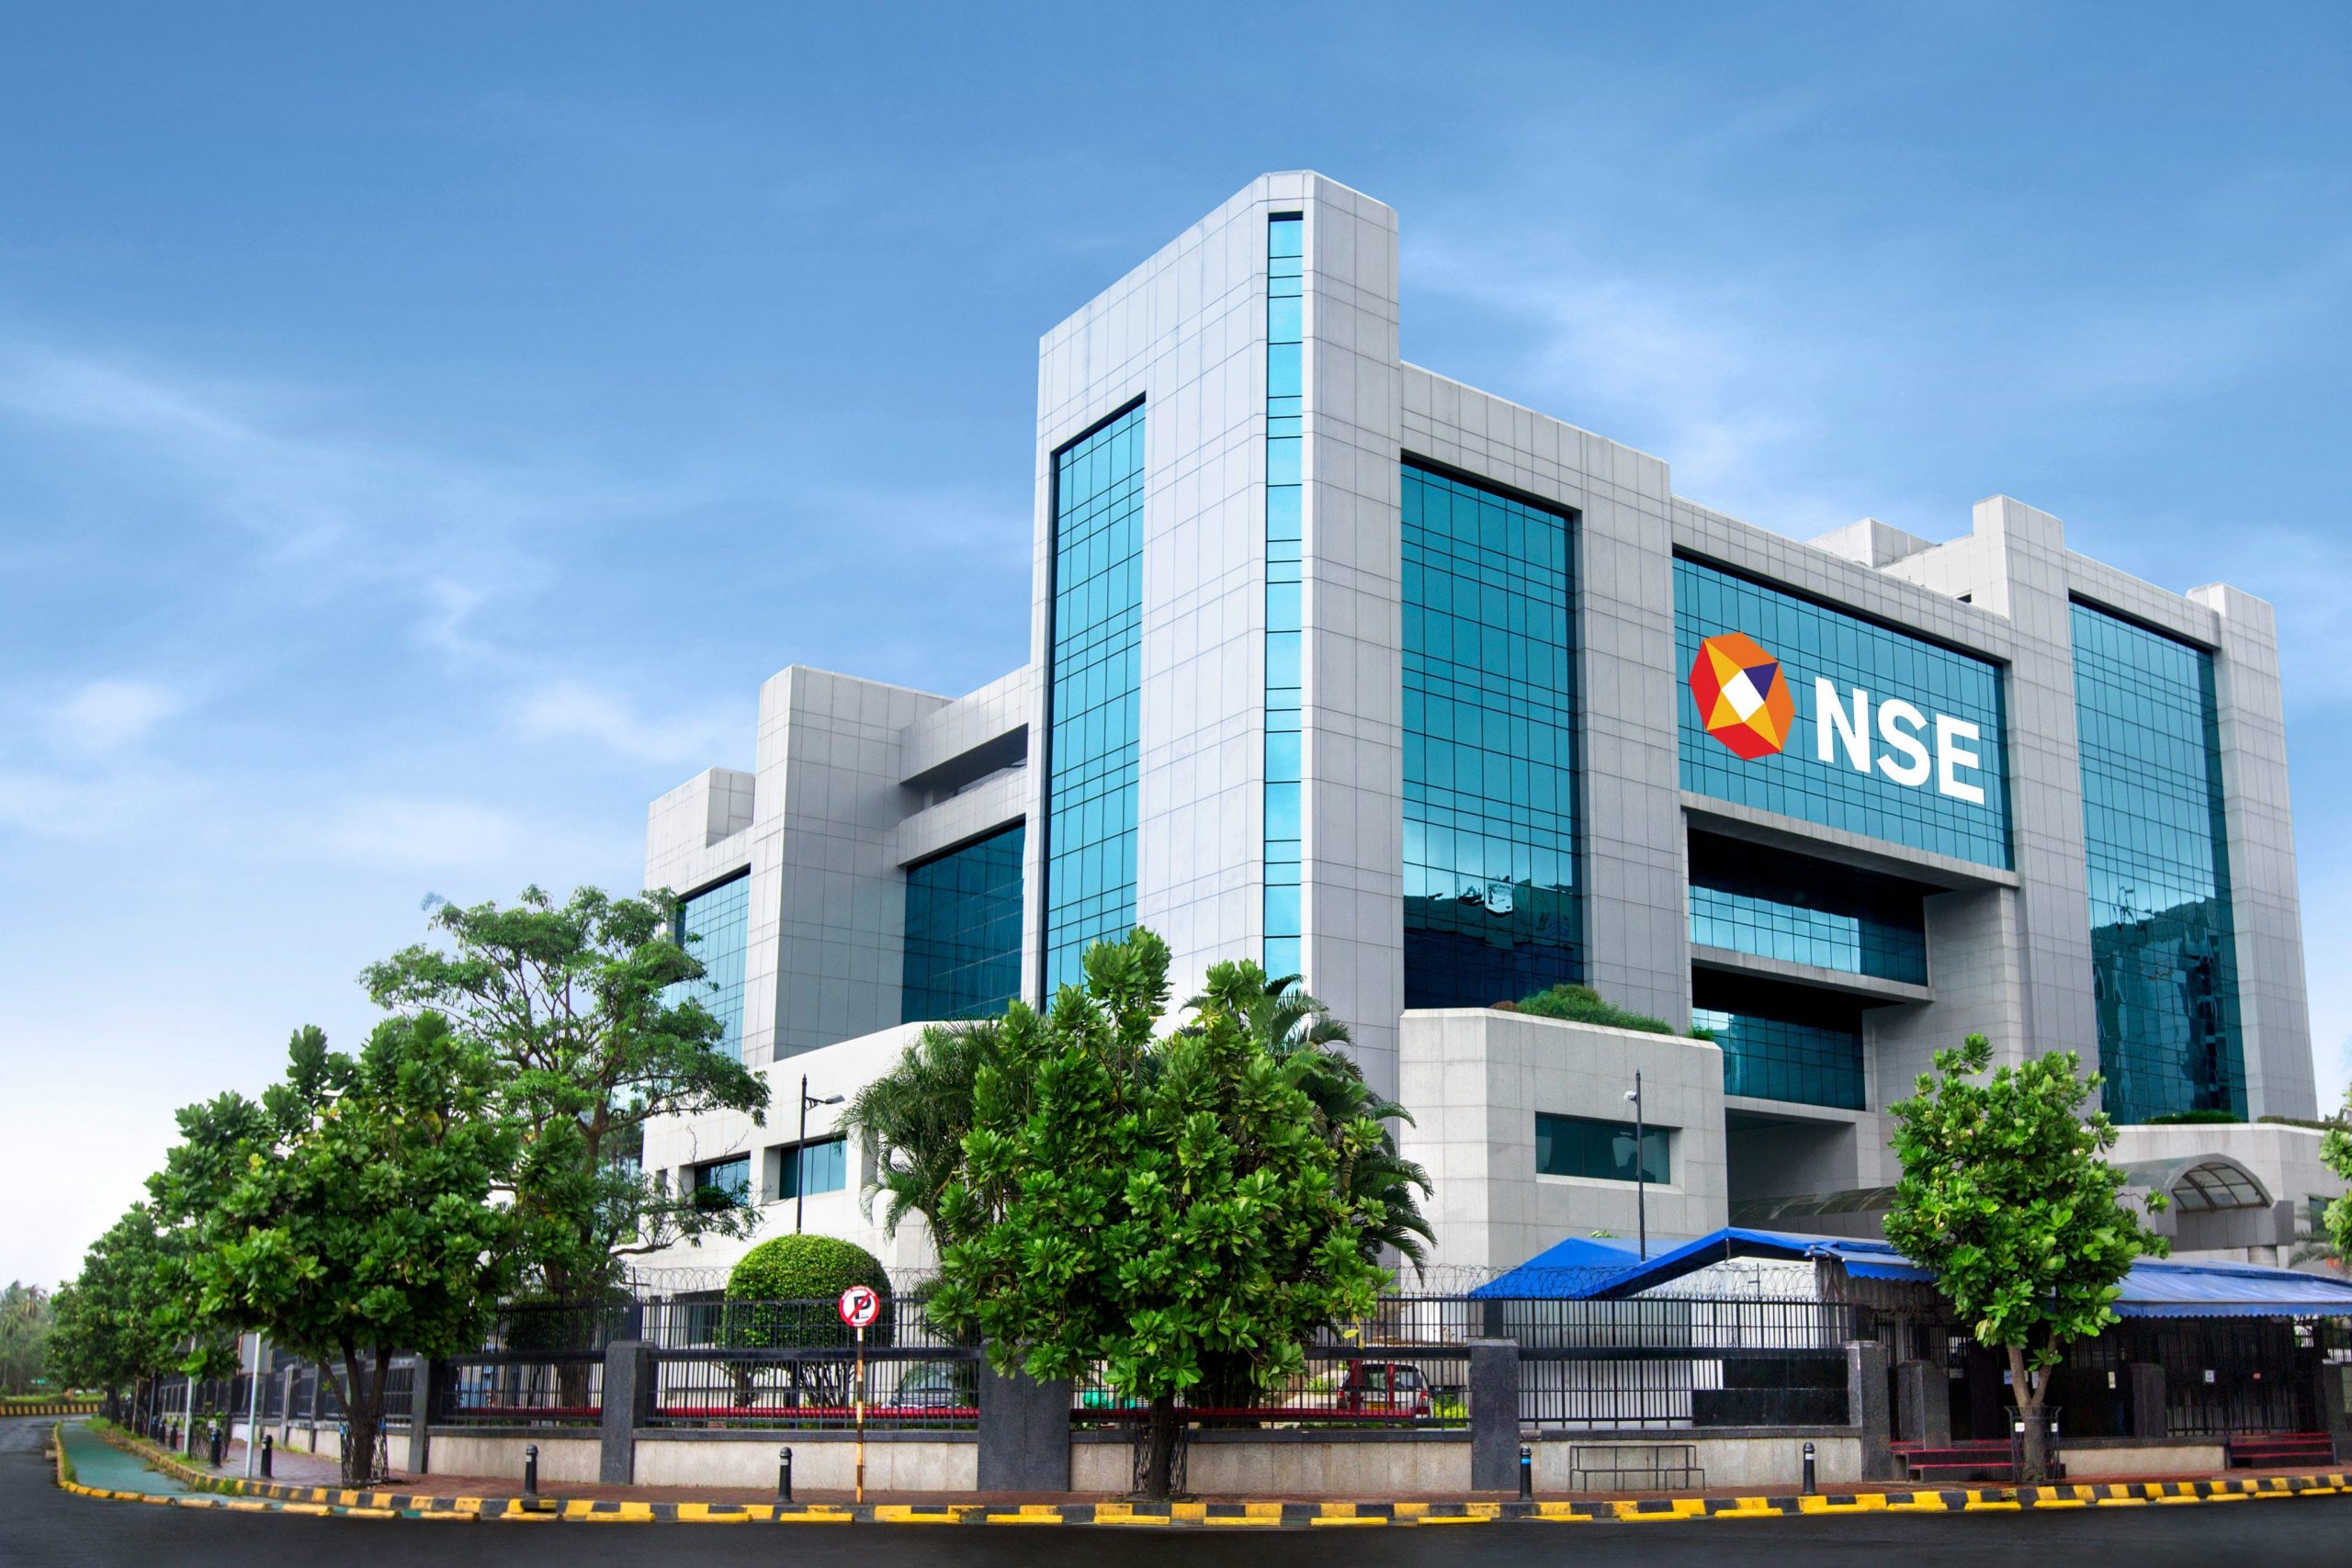 NSE F&O Ban: Sun Tv, RBL Bank and others under ban on Monday, June 27, 2022